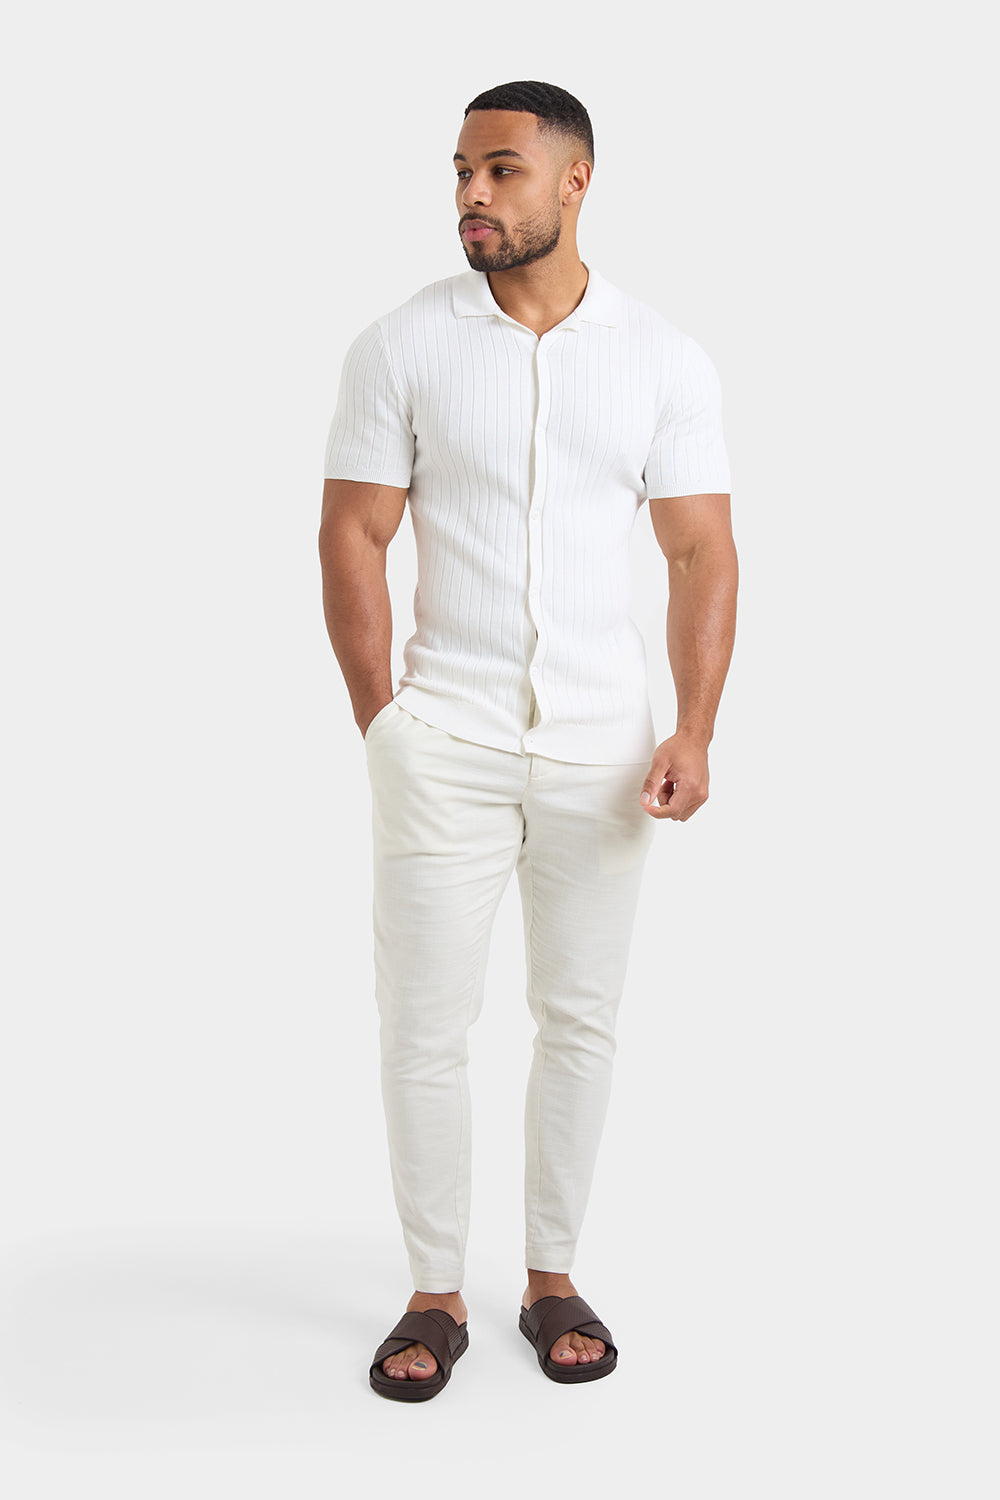 Ribbed T-Shirt in White - TAILORED ATHLETE - USA